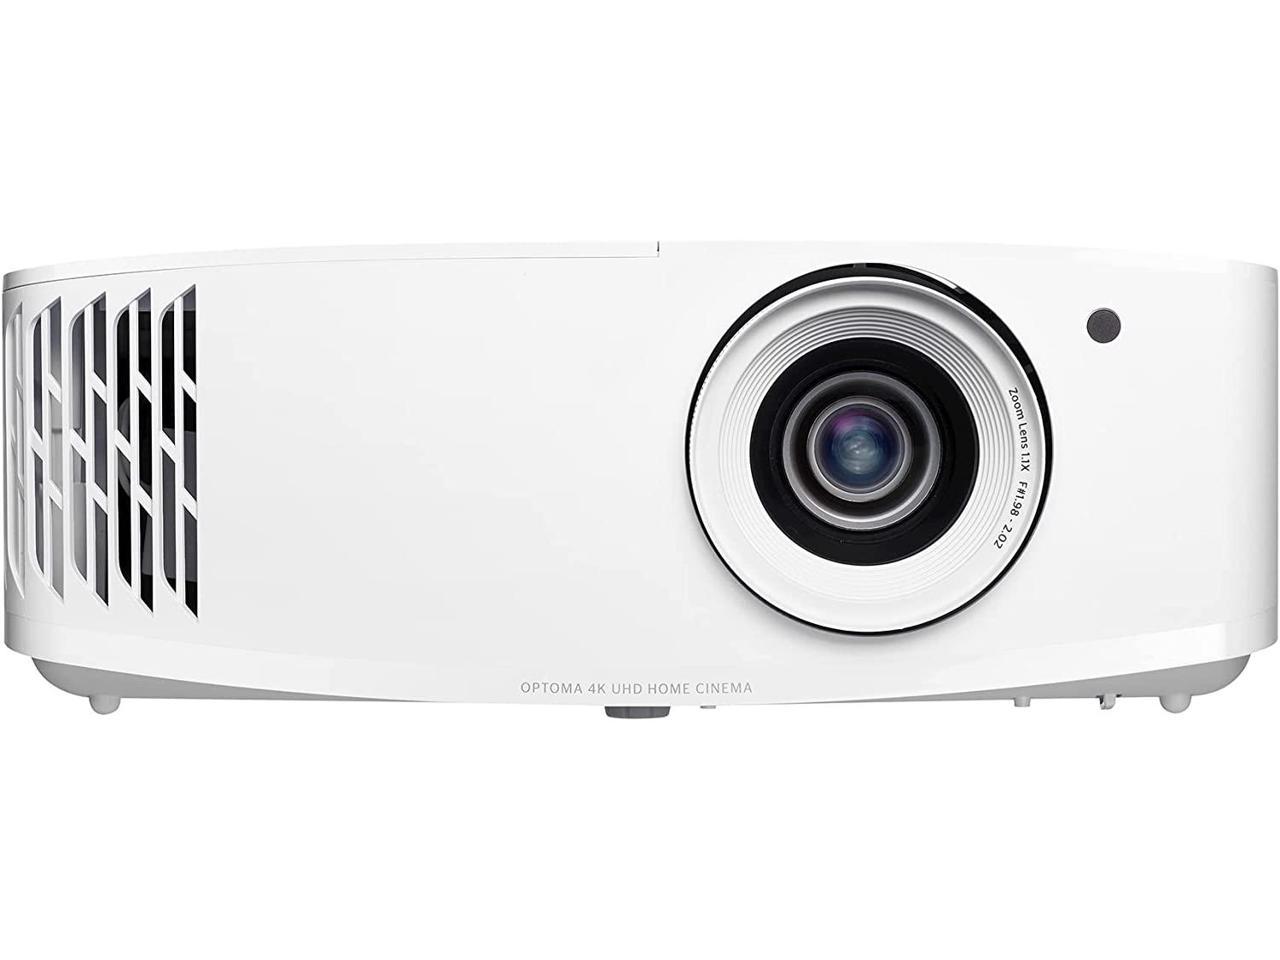 Optoma UHD38x Bright, True 4K UHD Gaming Projector | 4000 Lumens | 4.2ms Response Time at 1080p with Enhanced Gaming Mode | Lowest Input Lag on 4K Projector | 240Hz Refresh Rate | HDR10 & HLG - image 1 of 5